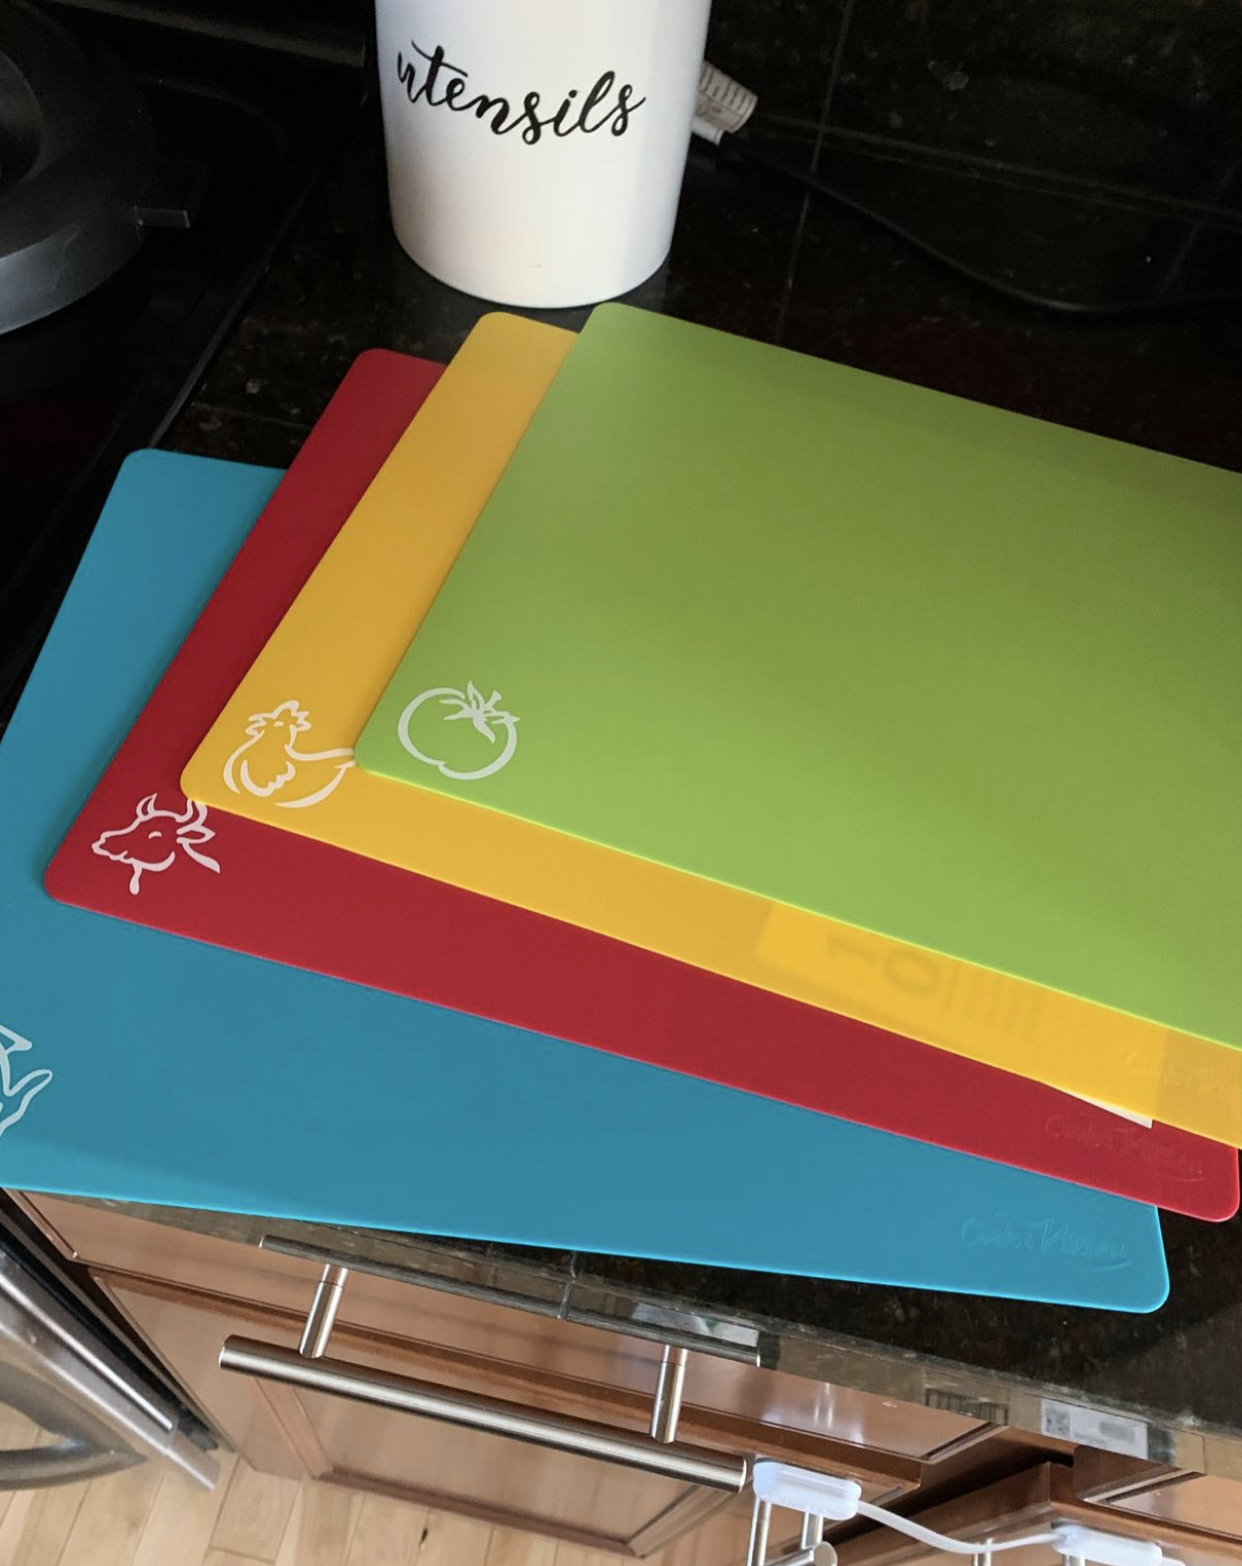 four mats with their solid cover and an animation of exactly what the mat should be for. Colors are blue, red (which has a cow), yellow (which has a chicken), and green (which has a tomato)